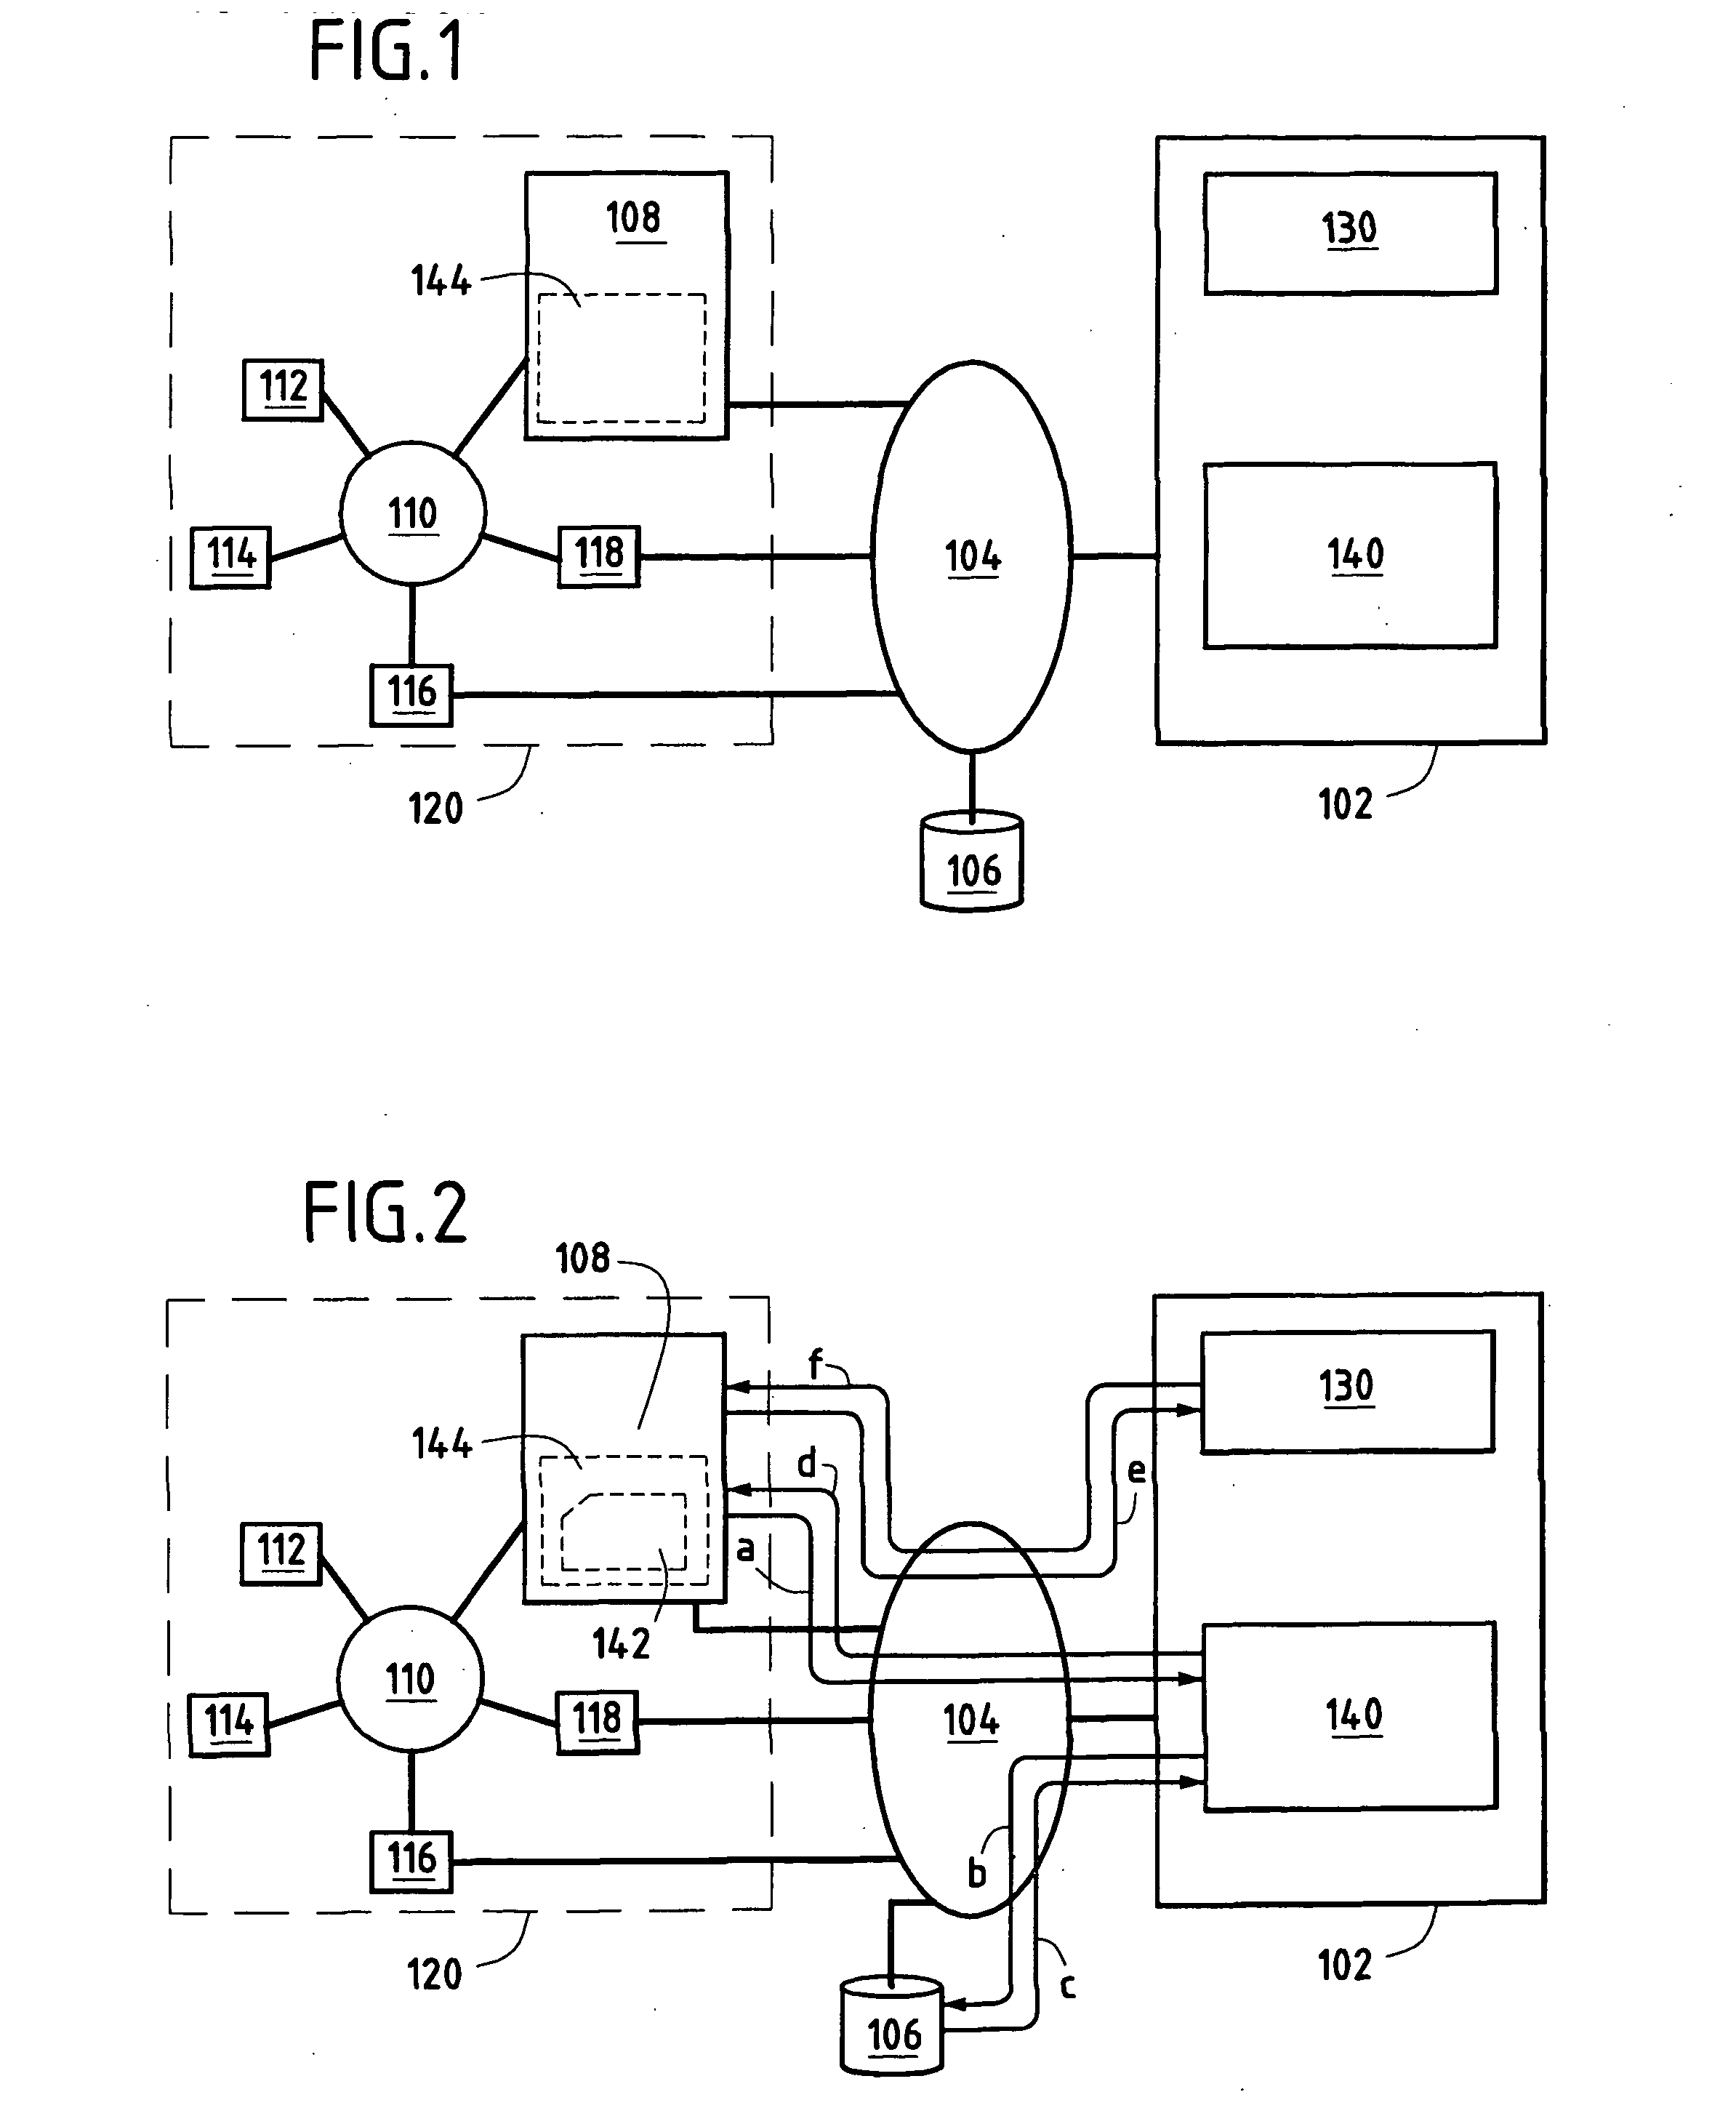 Context management system for a network including a heterogenous set of terminals